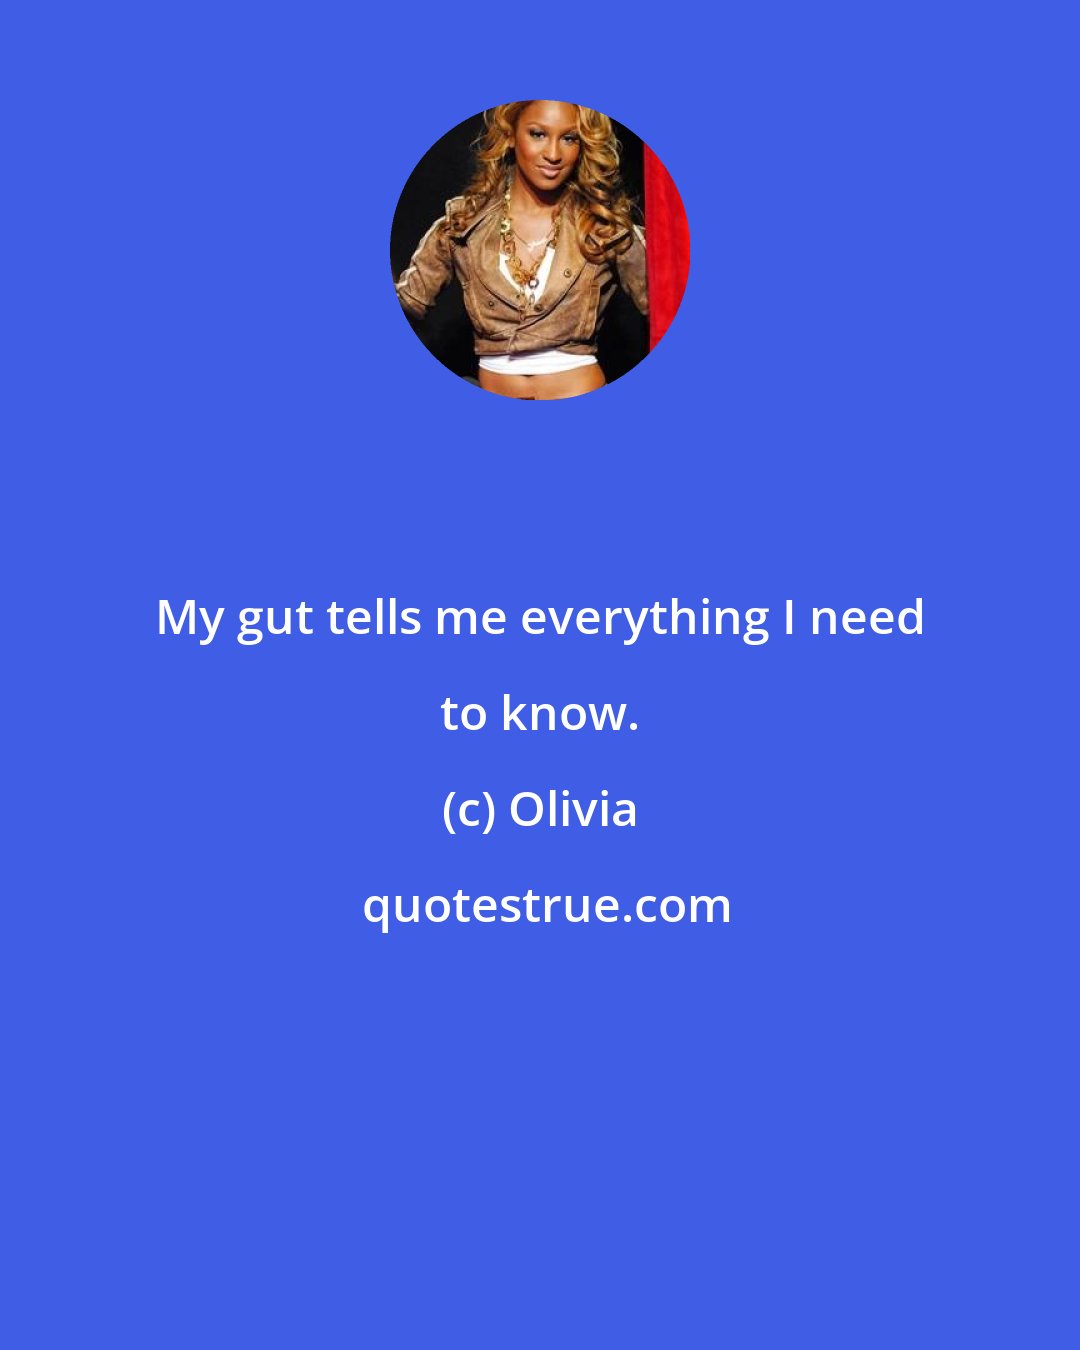 Olivia: My gut tells me everything I need to know.